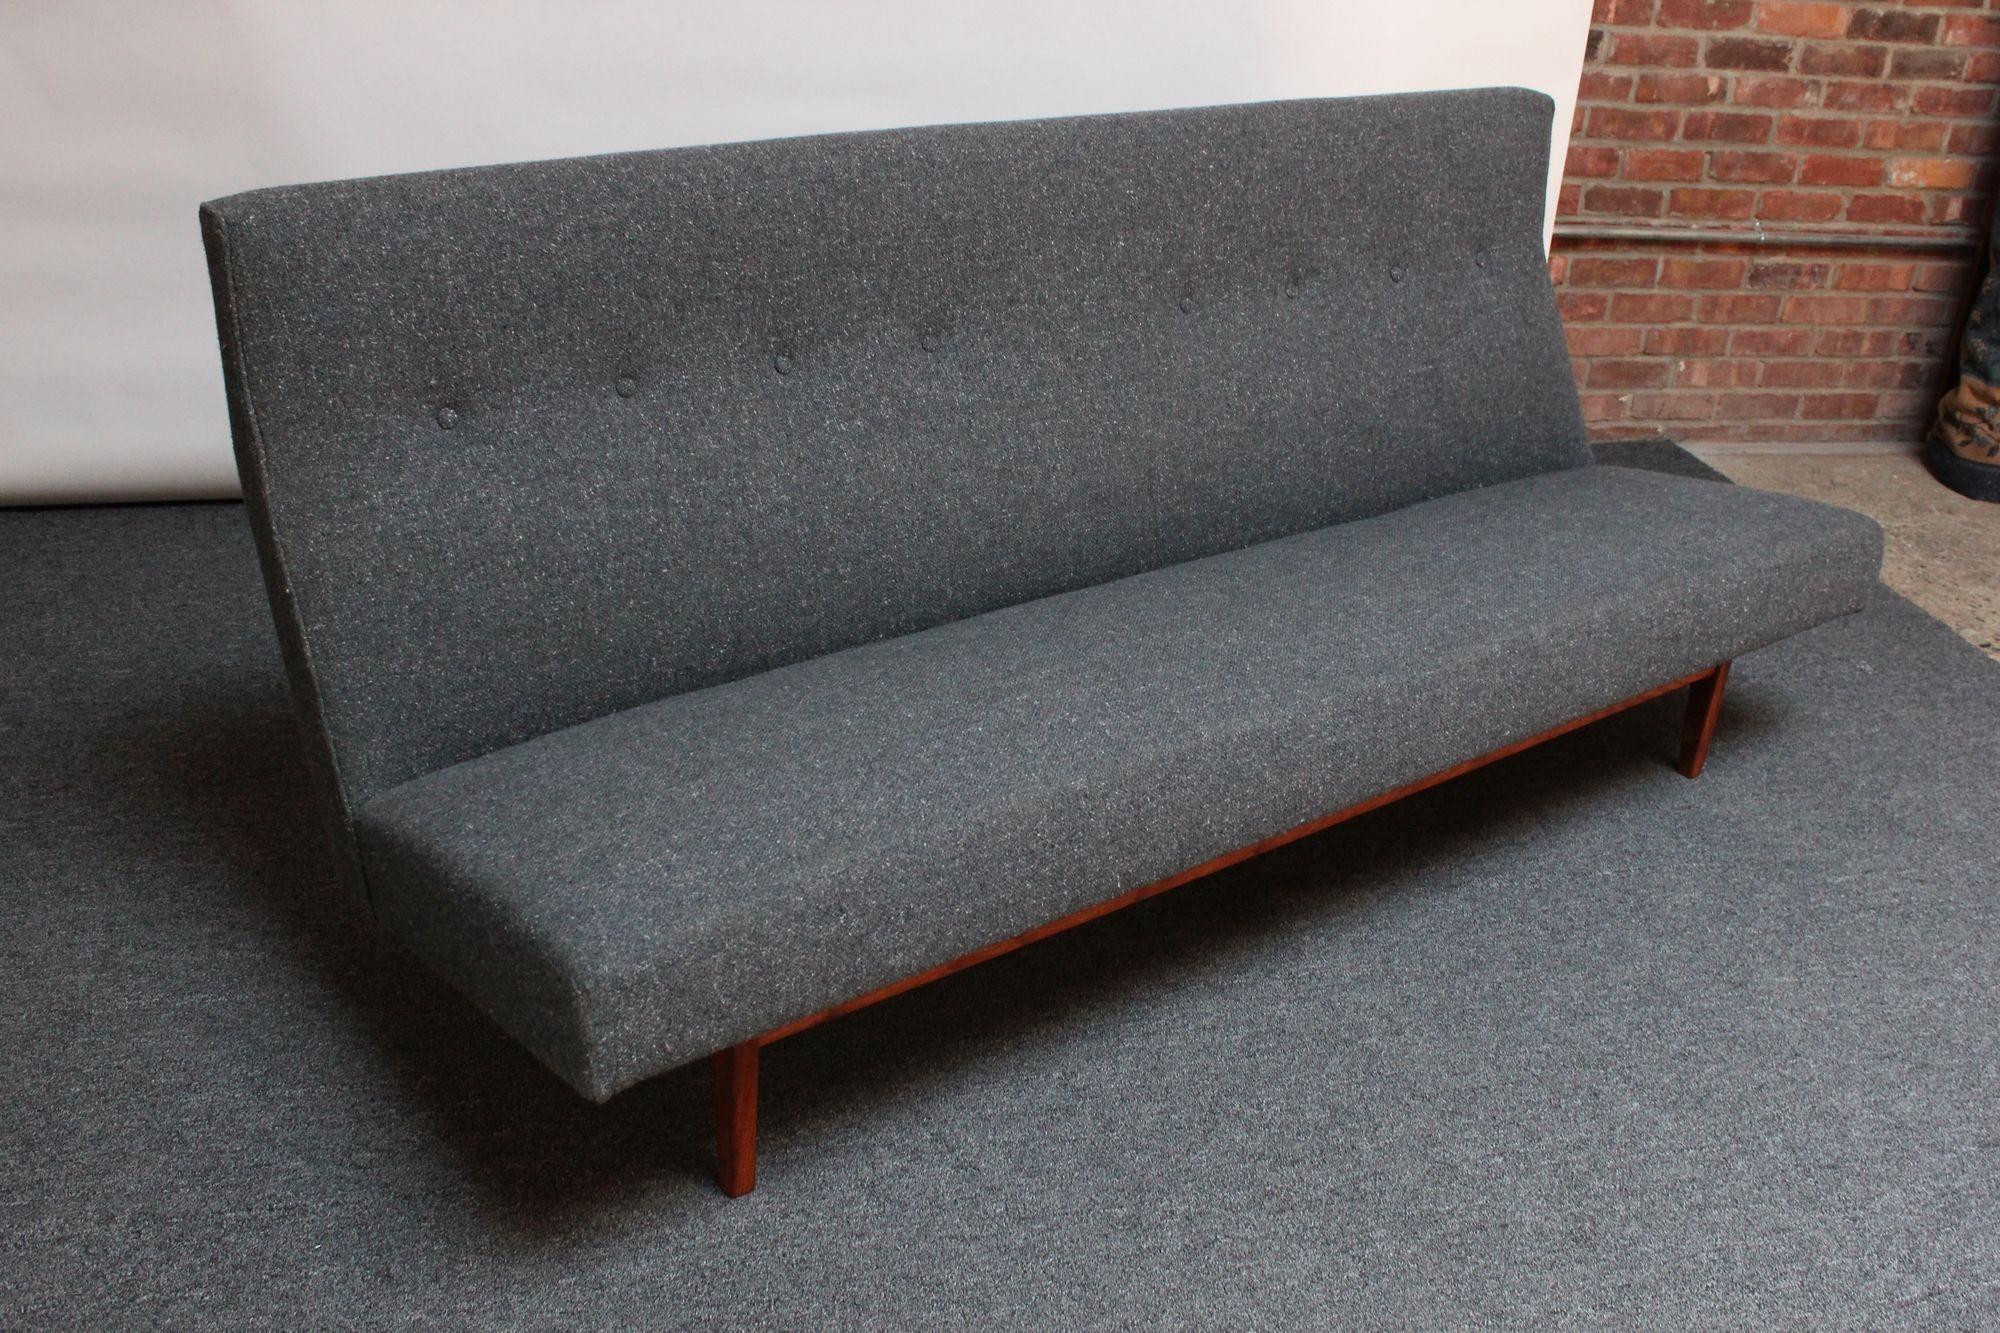 Three-seat sofa, Model #U250, designed by Jens Risom for Risom Design in the 1950s. Composed of a sculptural walnut base on which the tufted, high-back seat is mounted. Sharp, modernist lines presenting well from all angles.
Charcoal wool is